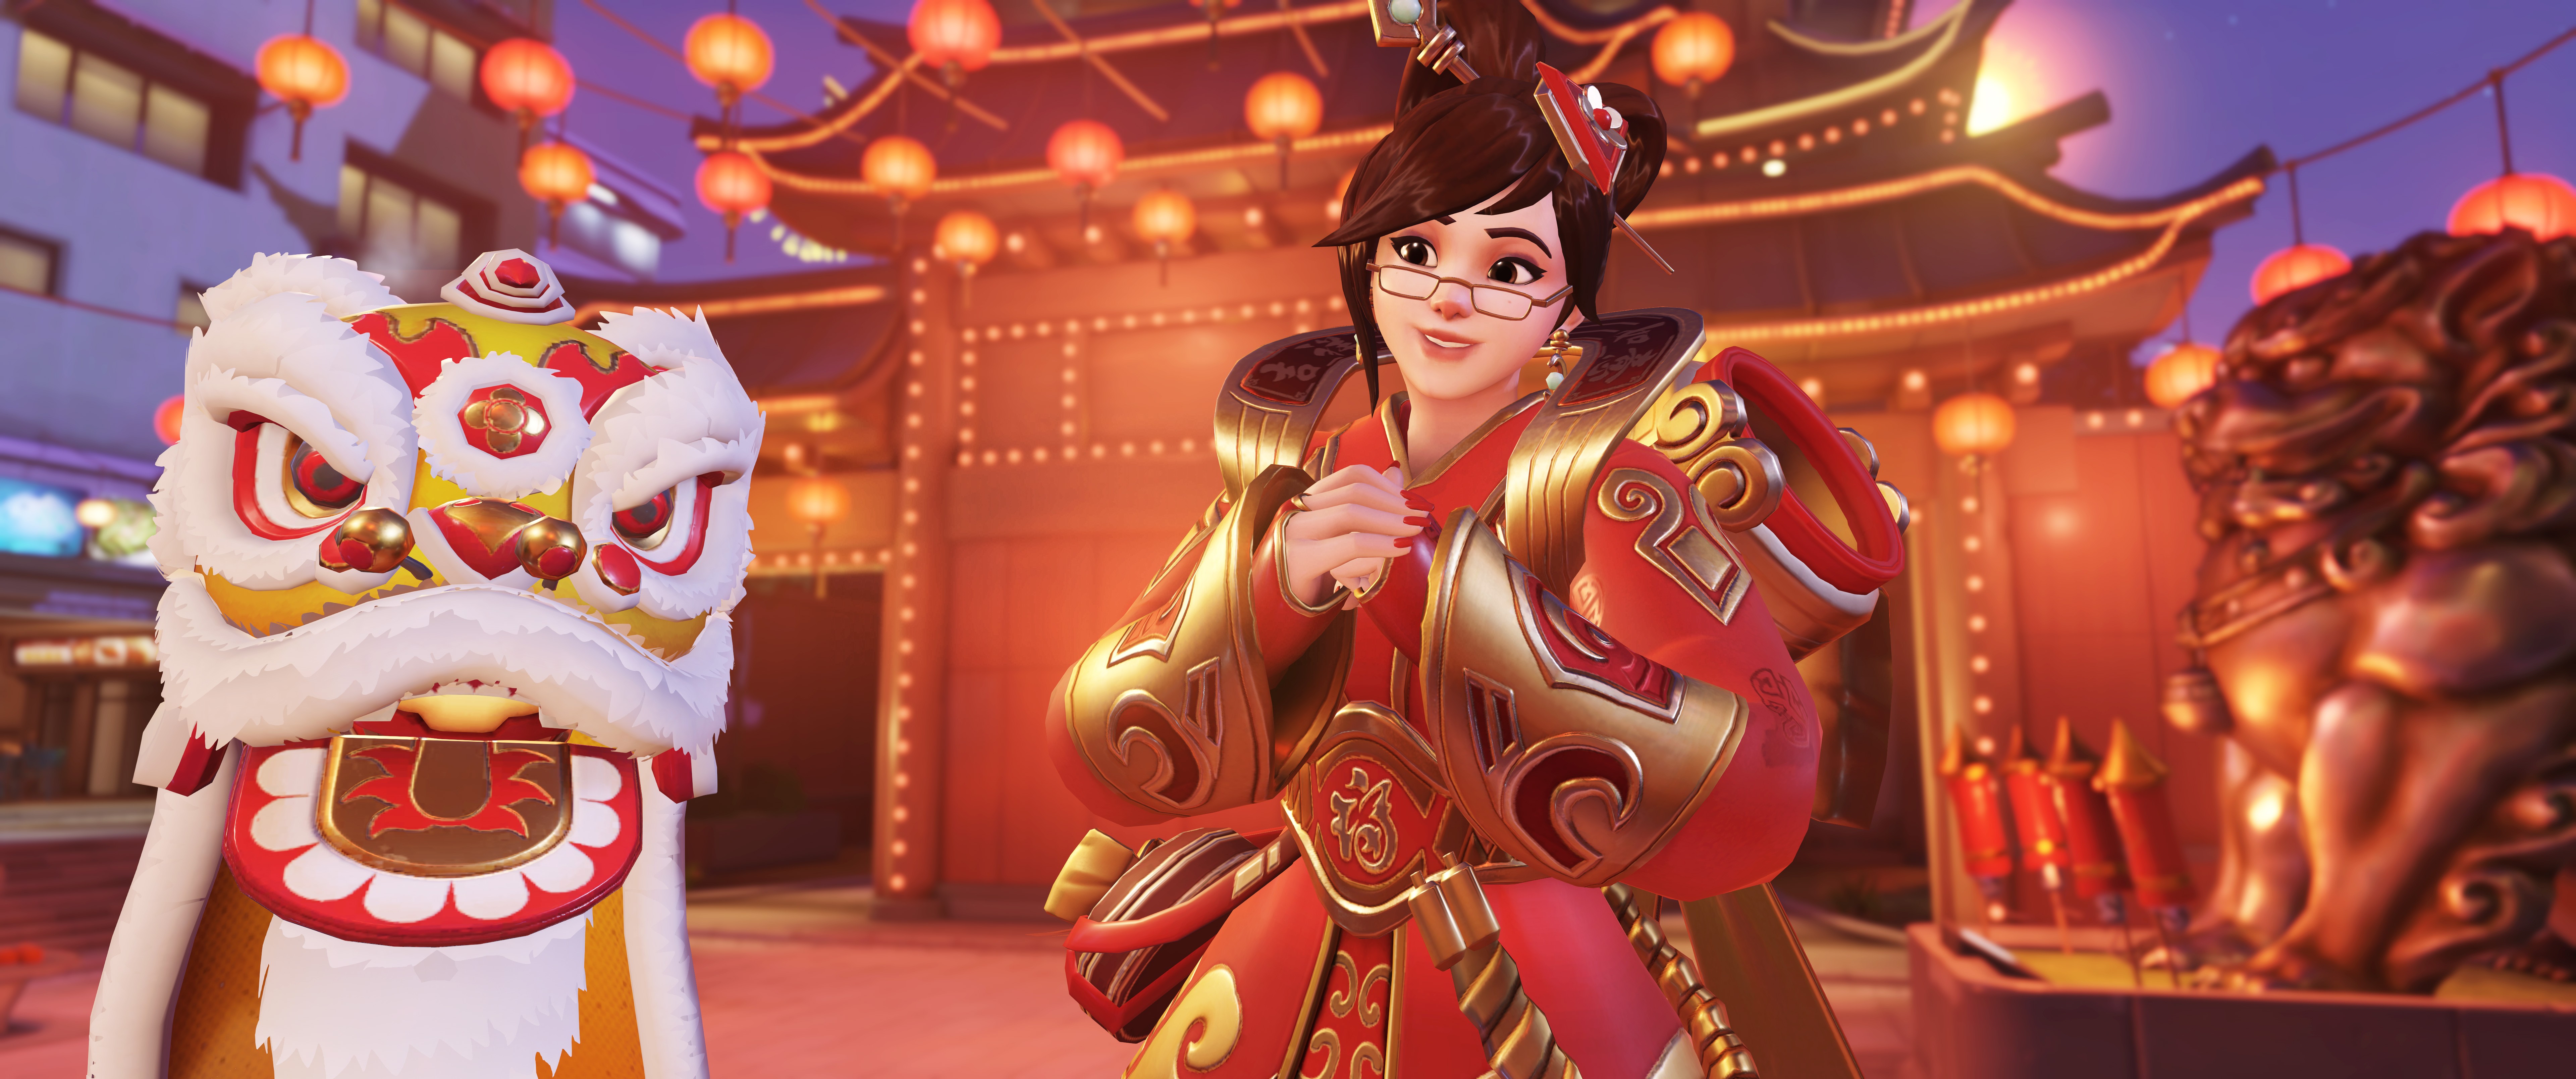 General 7680x3216 chinese new year Mei (Overwatch) Overwatch video game characters digital art